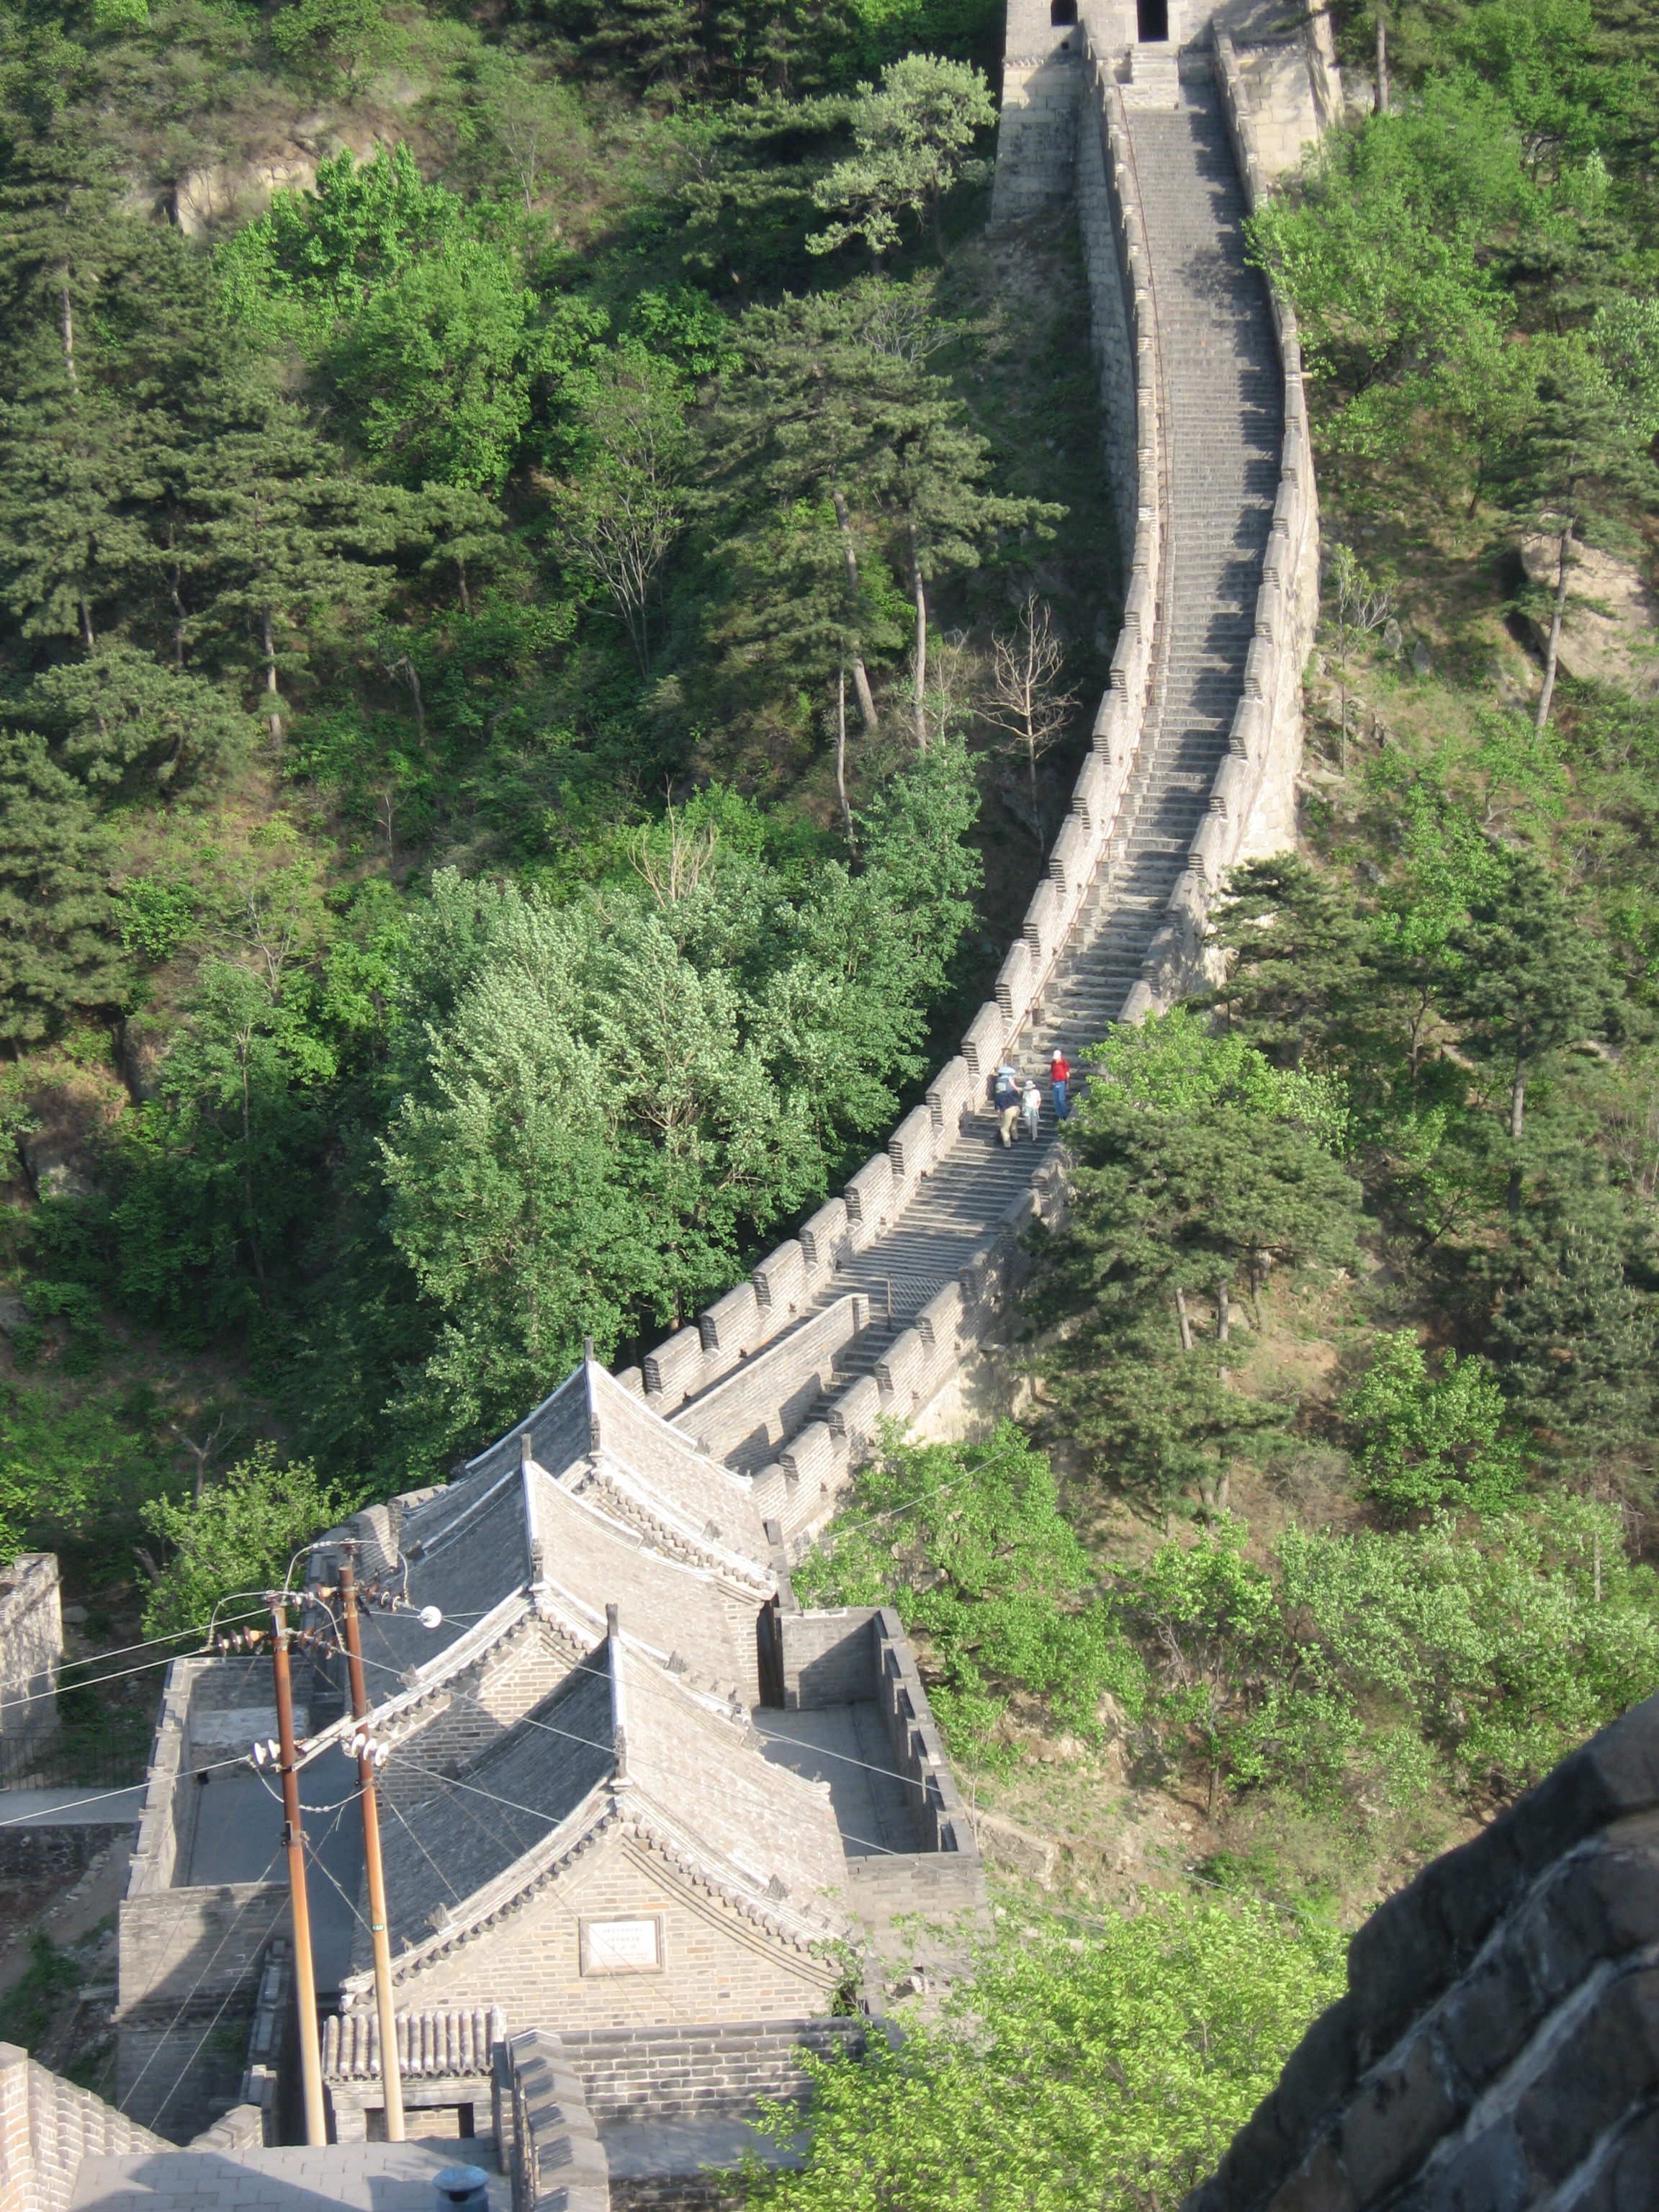 "The Great Wall"